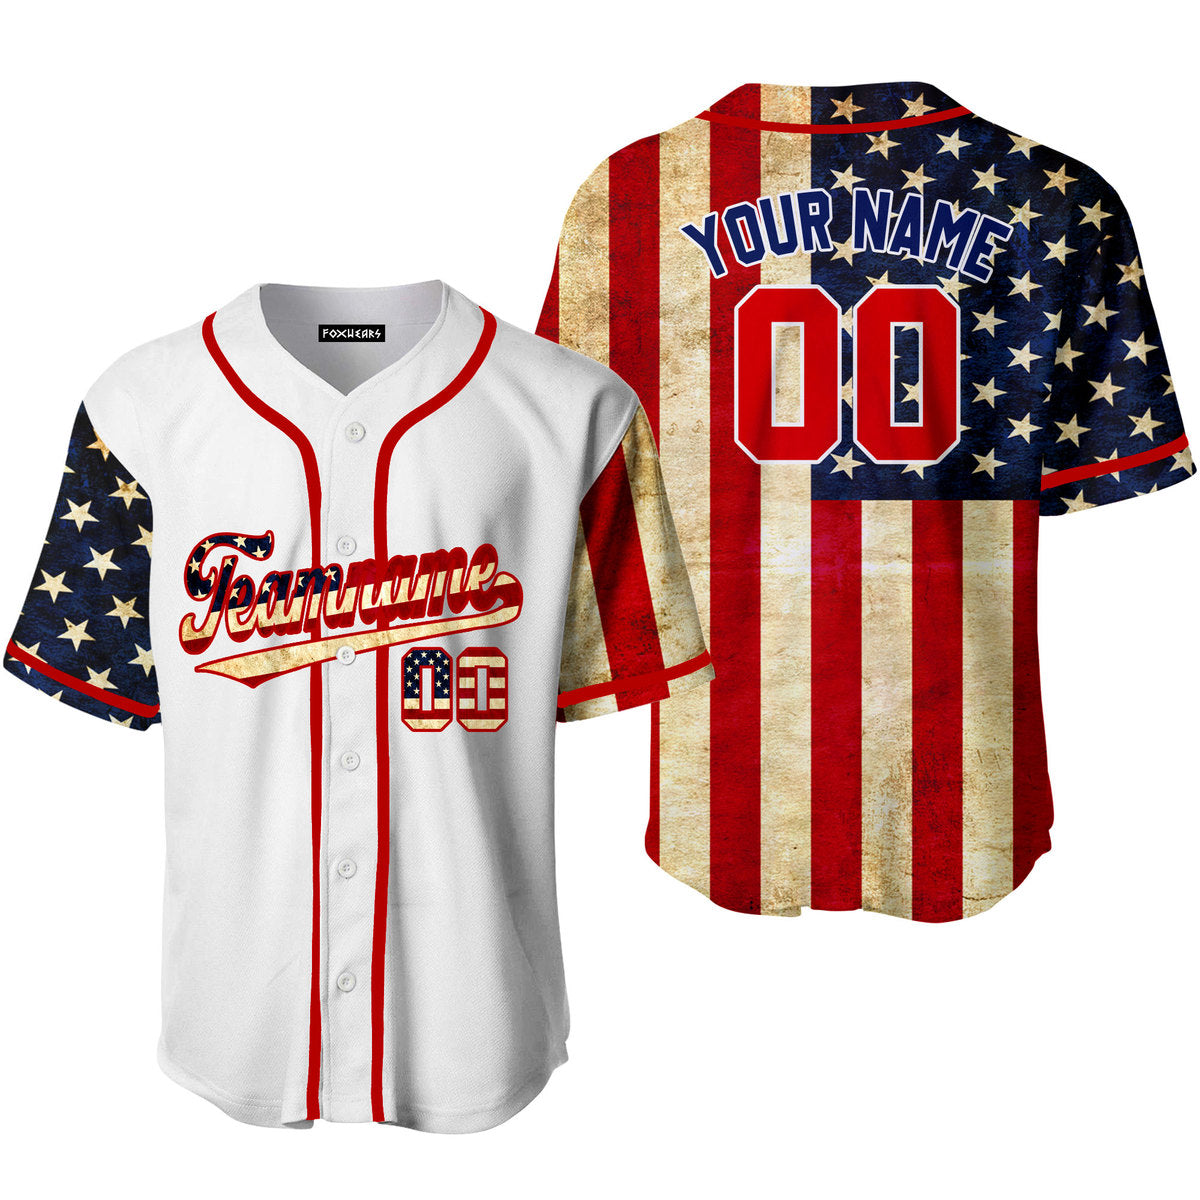 Personalized USA Flag White, Red And Blue Baseball Tee Jersey